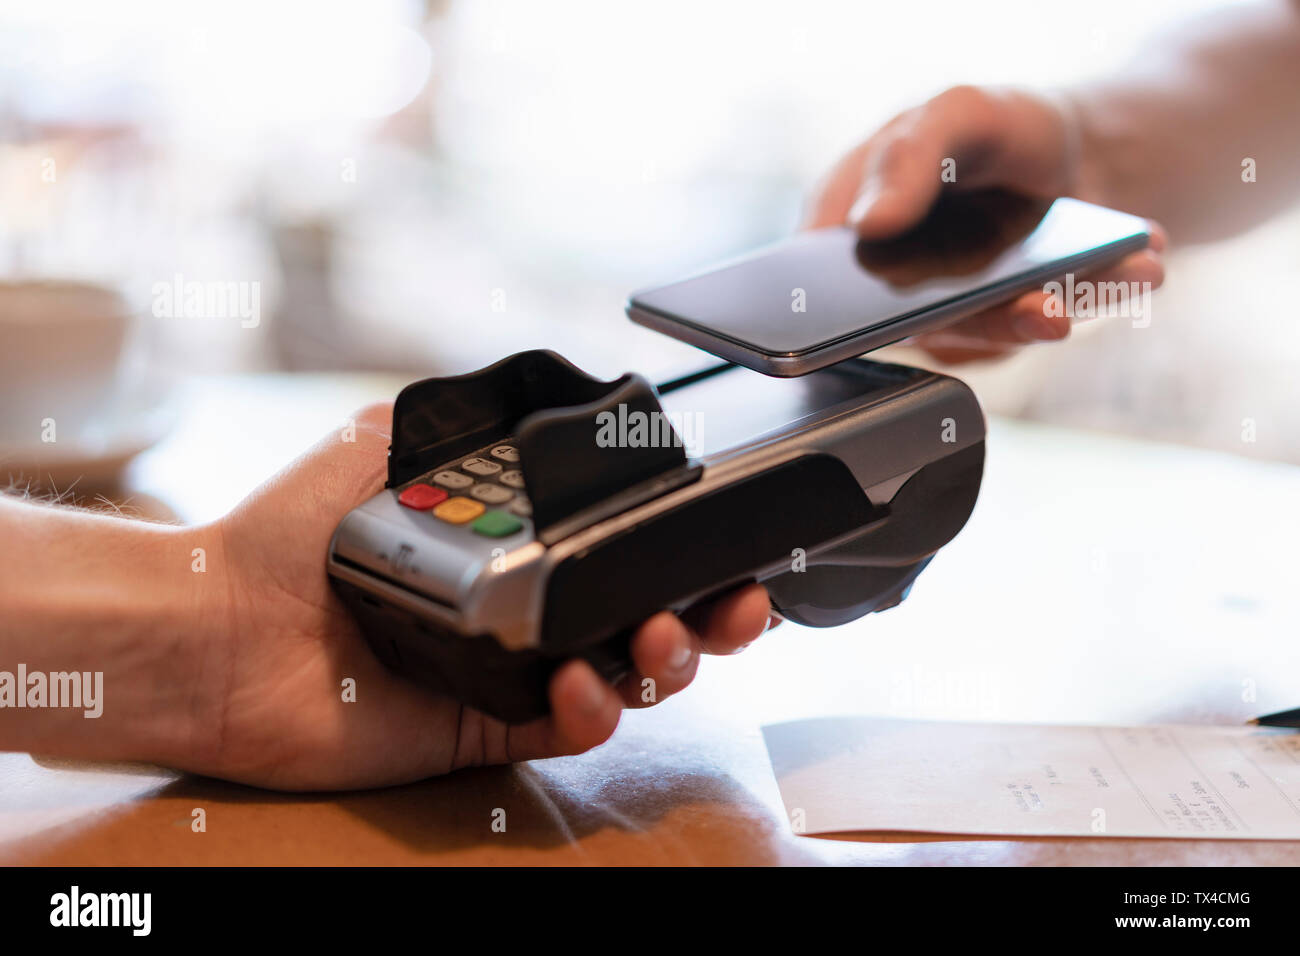 Contactless payment with smartphone, close-up Stock Photo